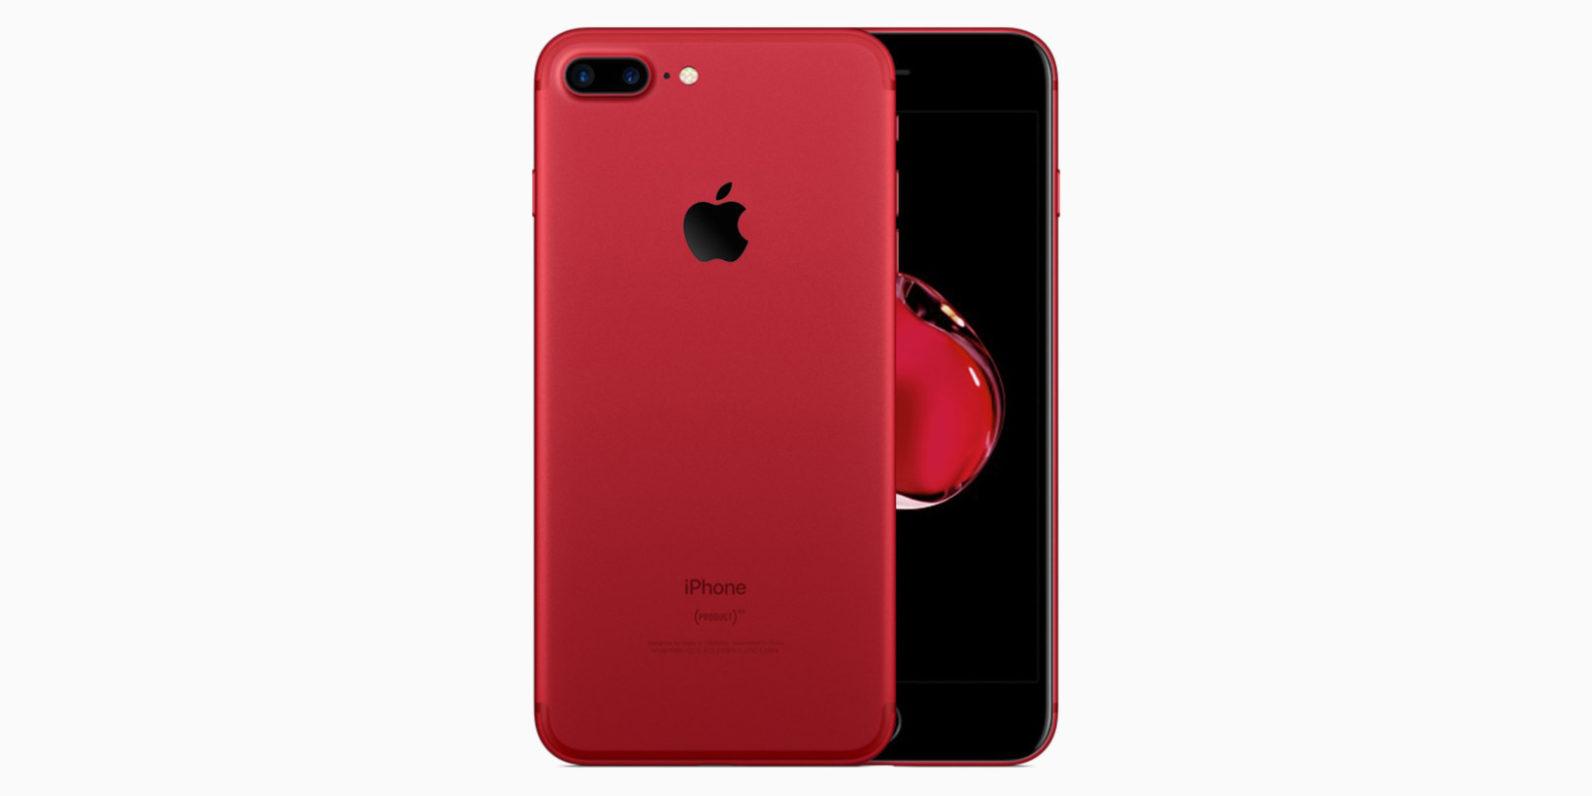 iPhone RED frontal negro